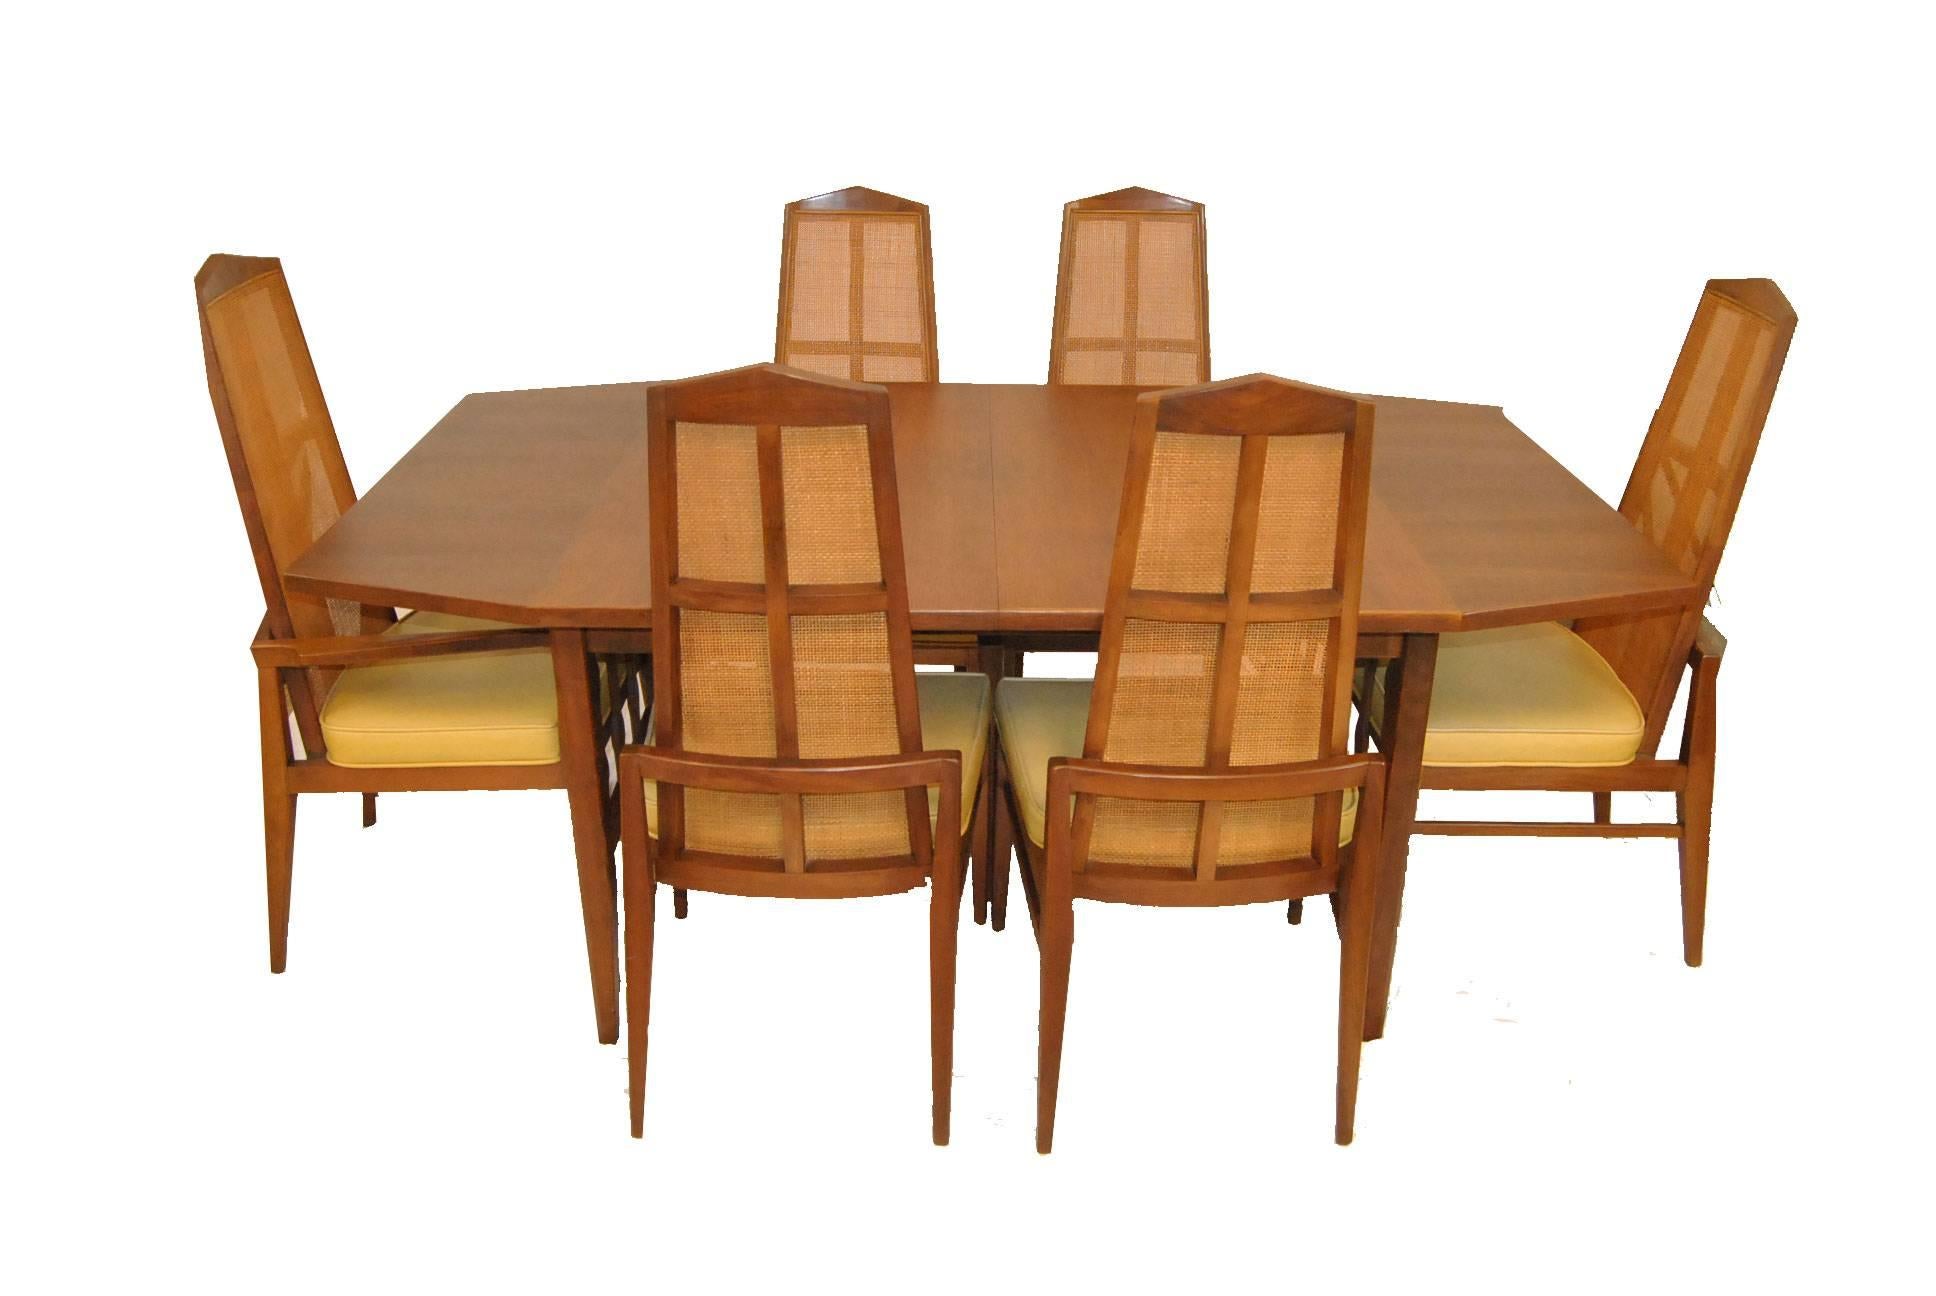 A beautiful set that includes the Probber style walnut octagon table and six chairs (one arm and five side chairs). Each chair features a tall caned back with crucifix frame and is upholstered in a pale yellow Naugahyde material. A great set from